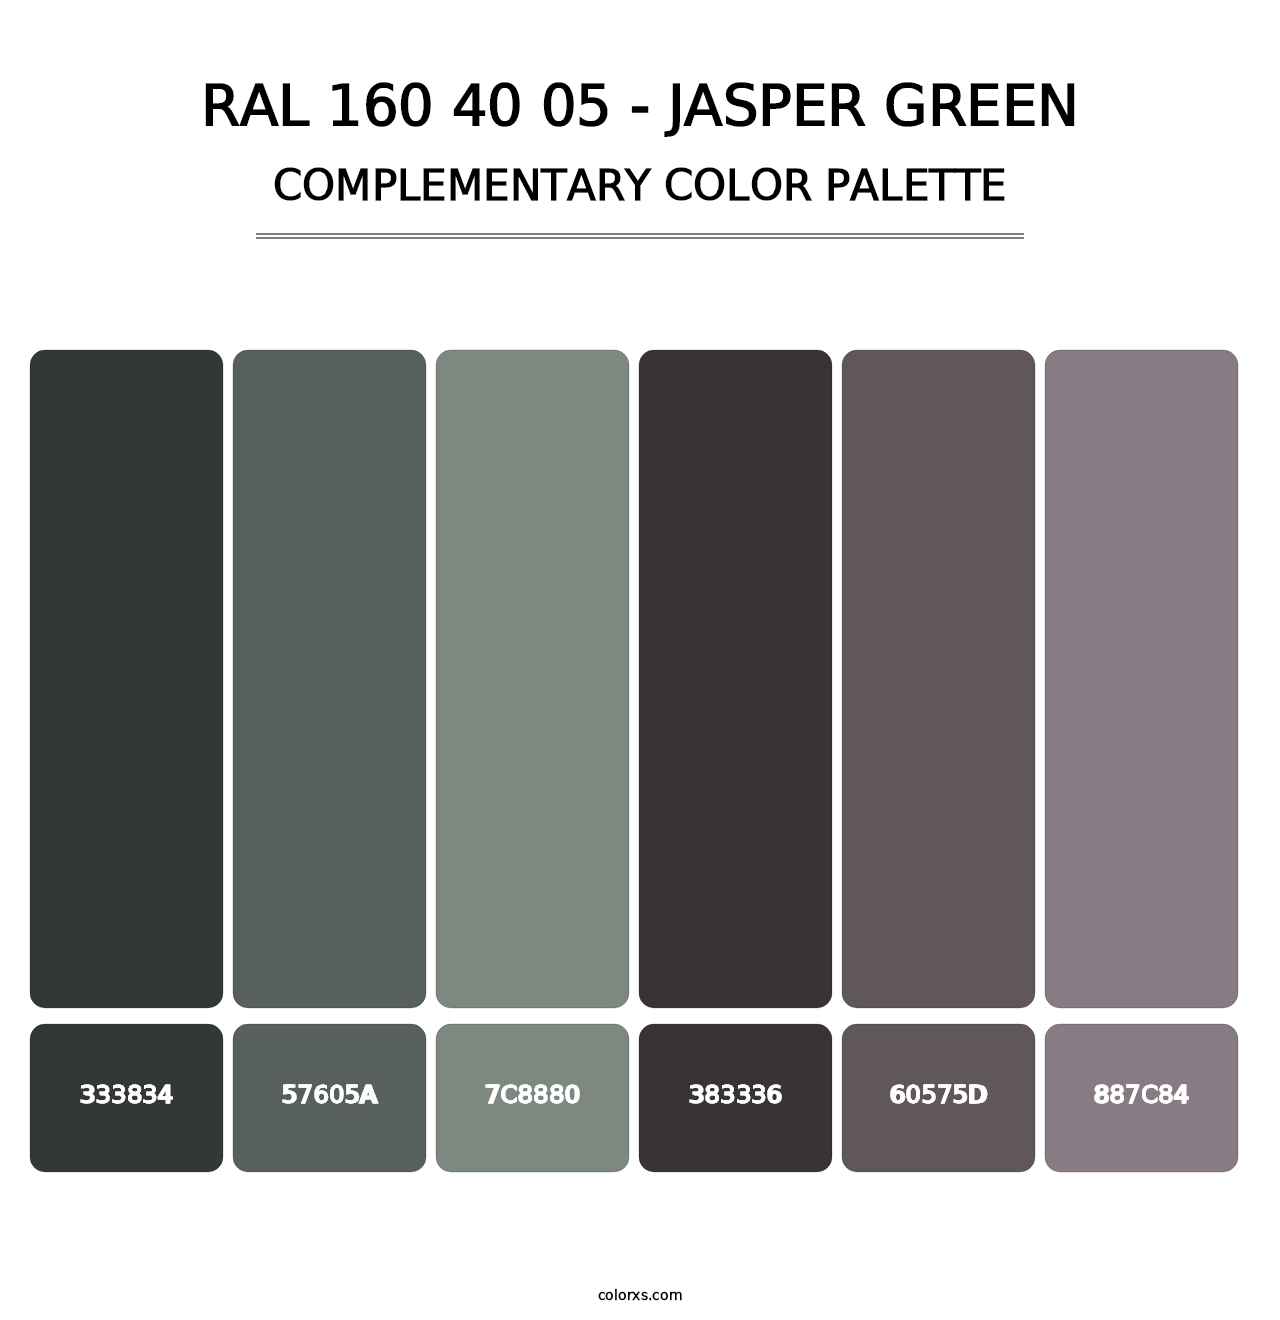 RAL 160 40 05 - Jasper Green - Complementary Color Palette